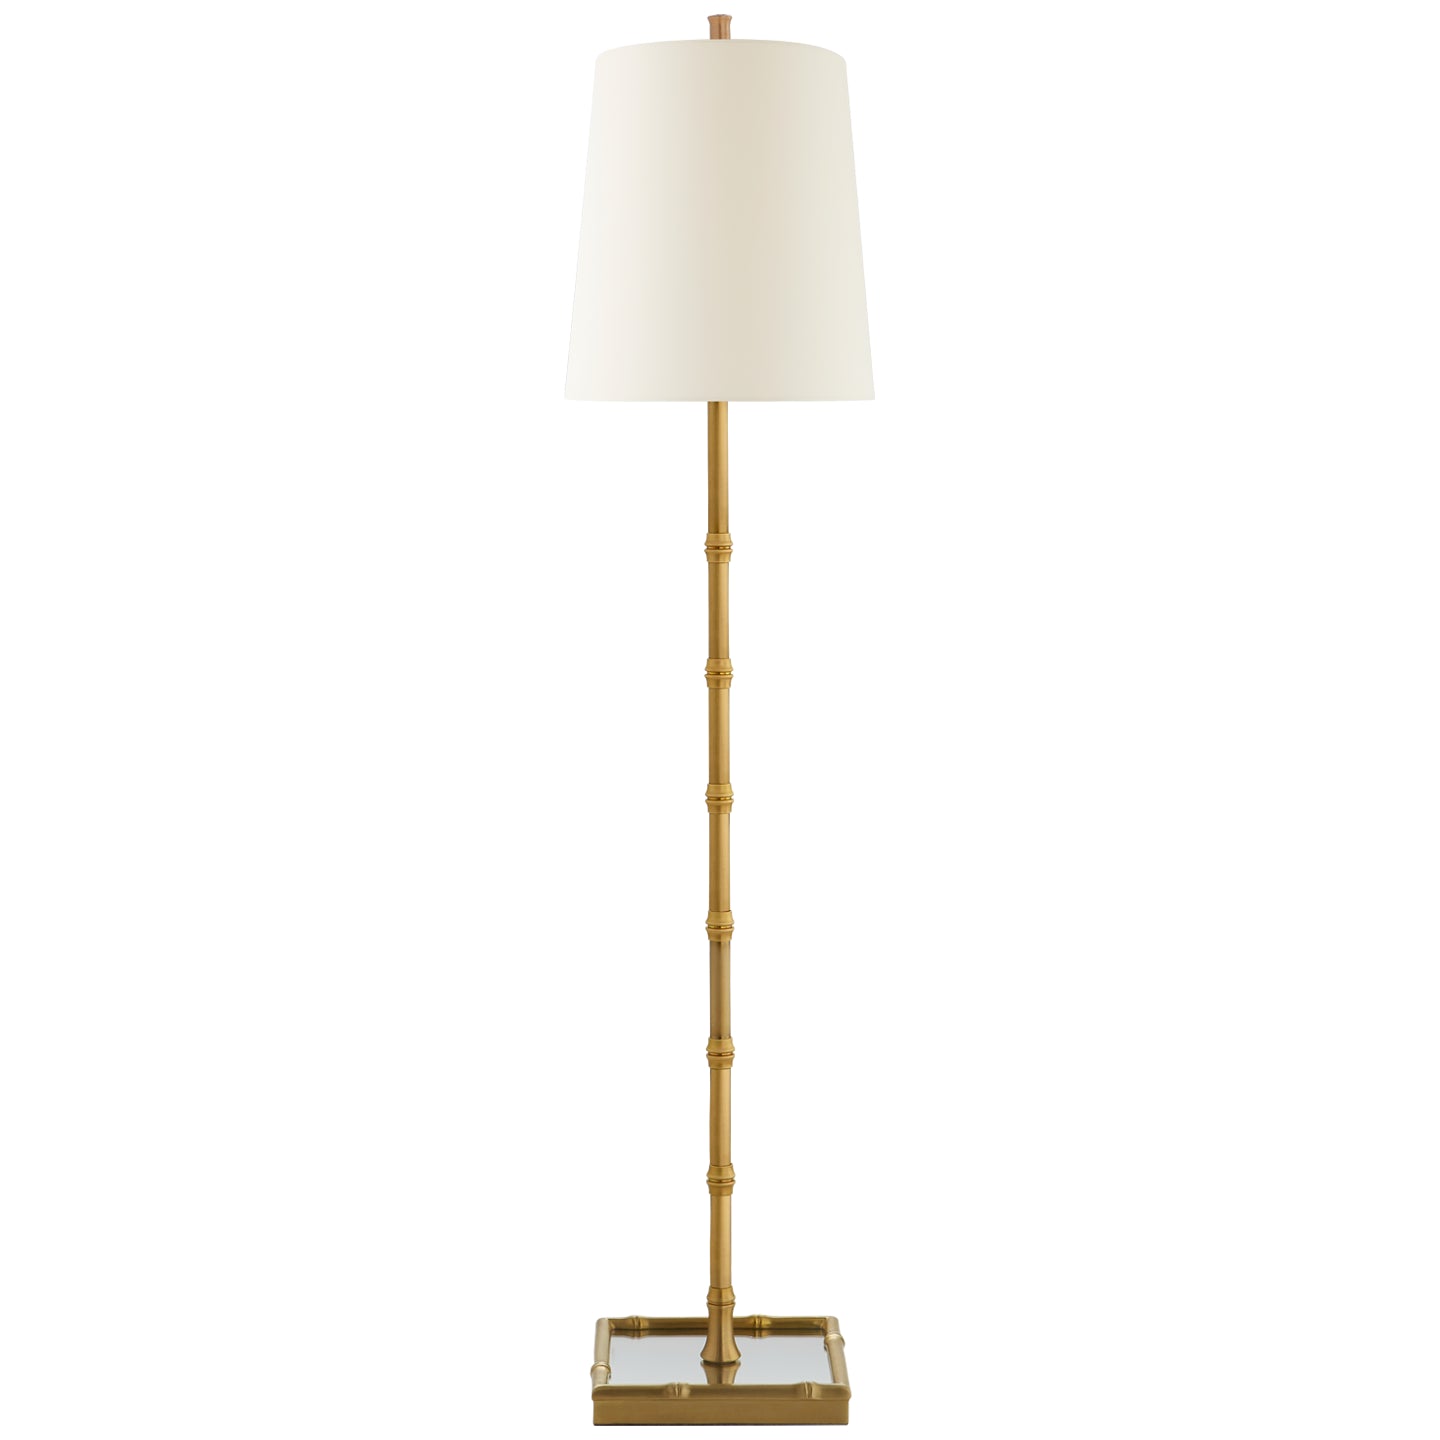 Visual Comfort Signature - S 3177HAB-PL - One Light Table Lamp - Grenol - Hand-Rubbed Antique Brass